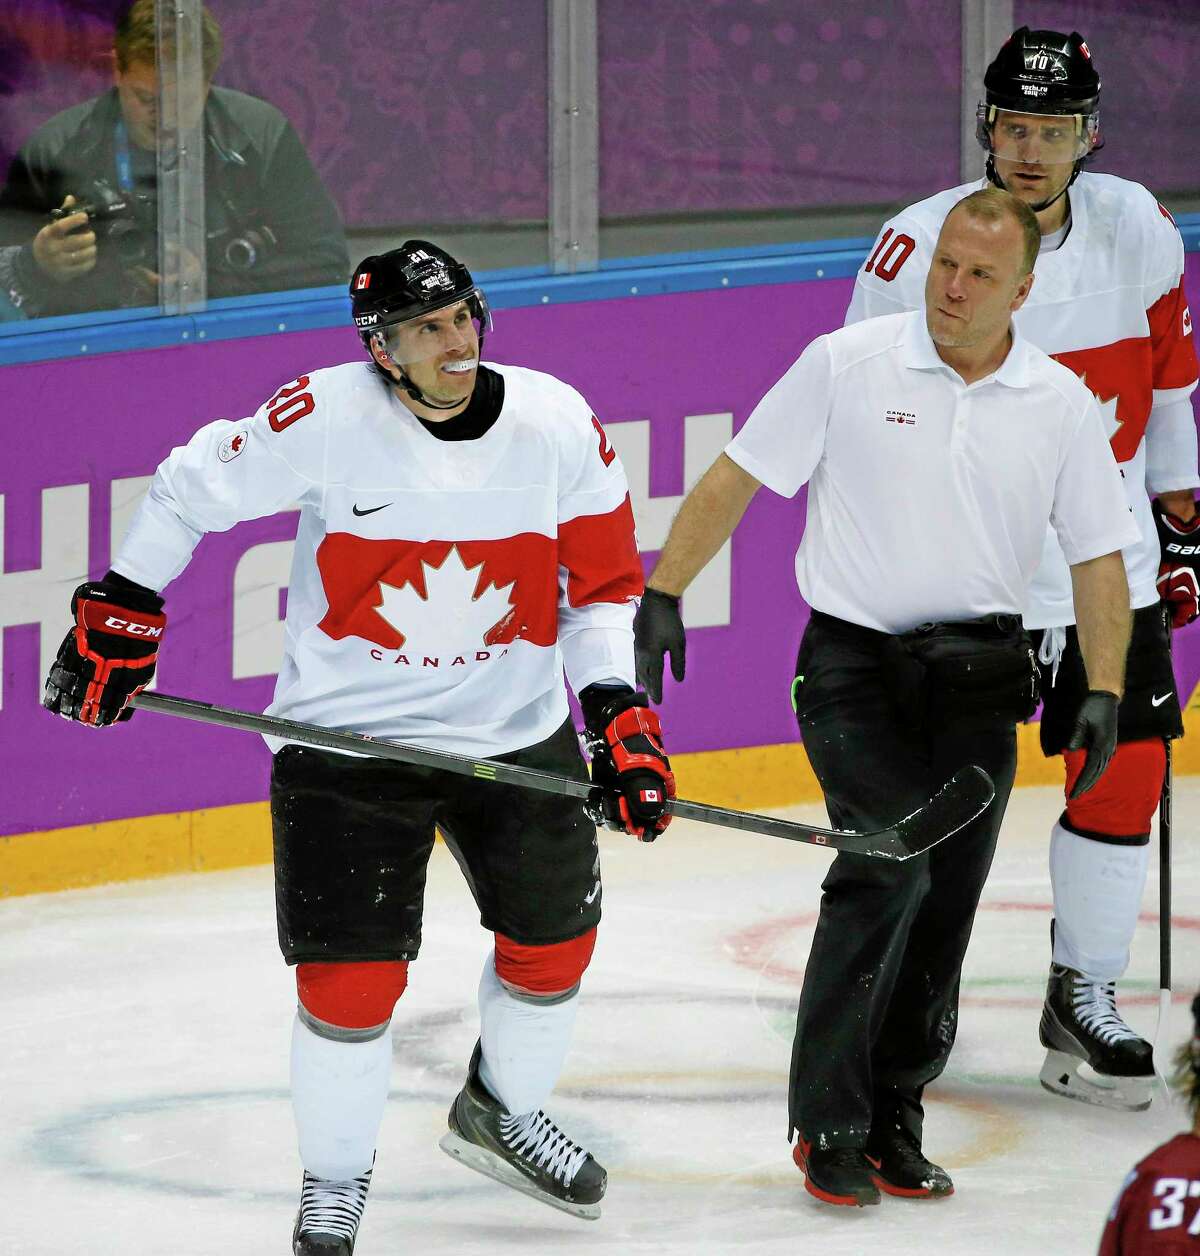 Canada forward John Tavares skates off the ice with a trainer after sustaining a knee injury during the second period of a men’s quarterfinal game against Latvia at Winter Olympics last Wednesday in Sochi, Russia. The Islanders captain will not need surgery.